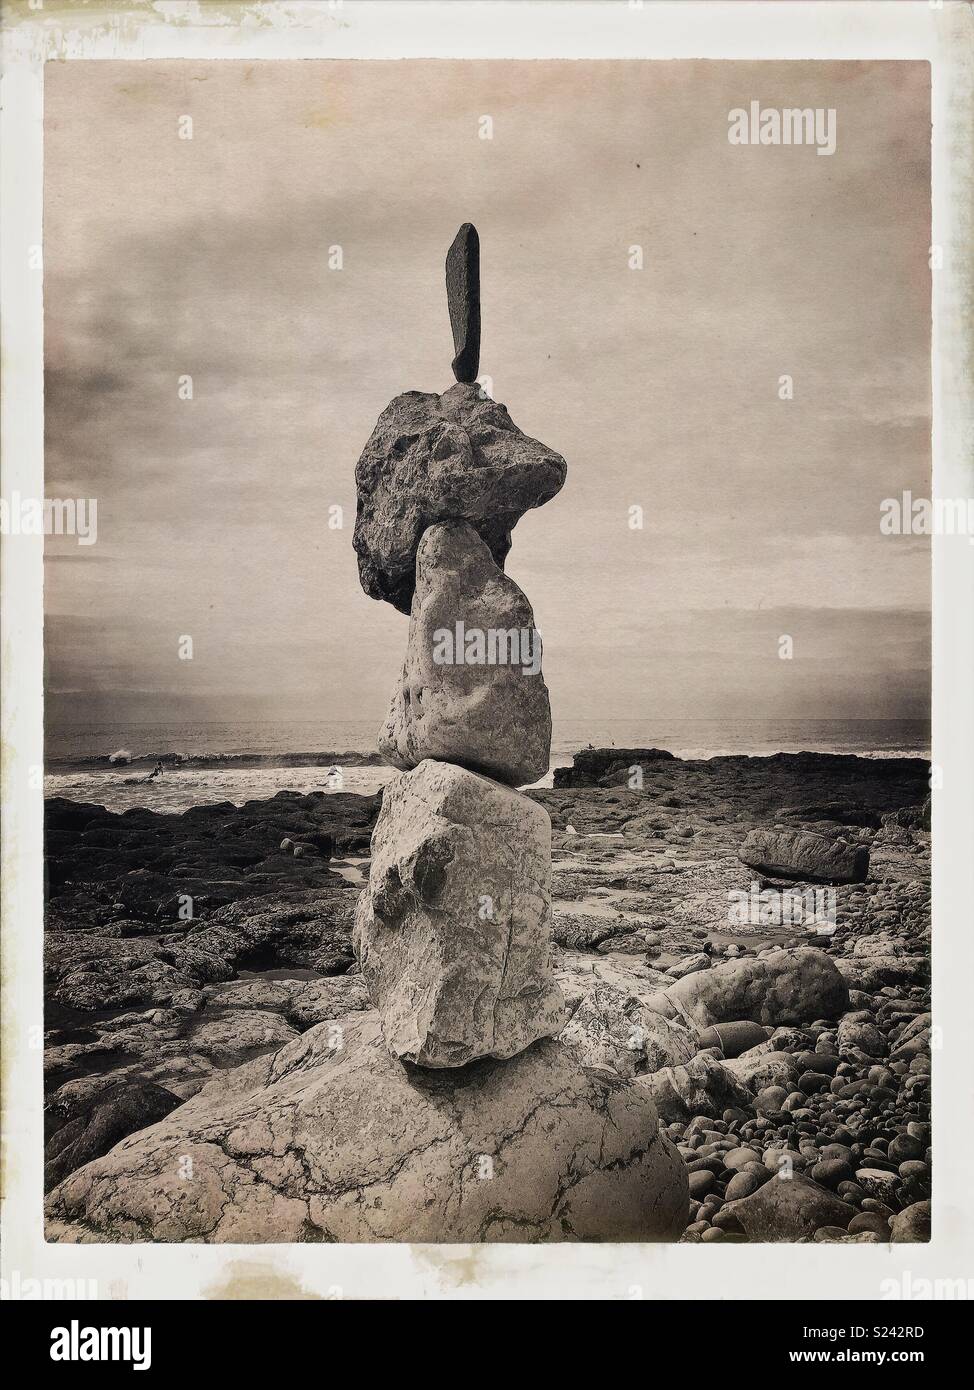 Natural stone/rock balancing sculpture on beach with waves. Stock Photo